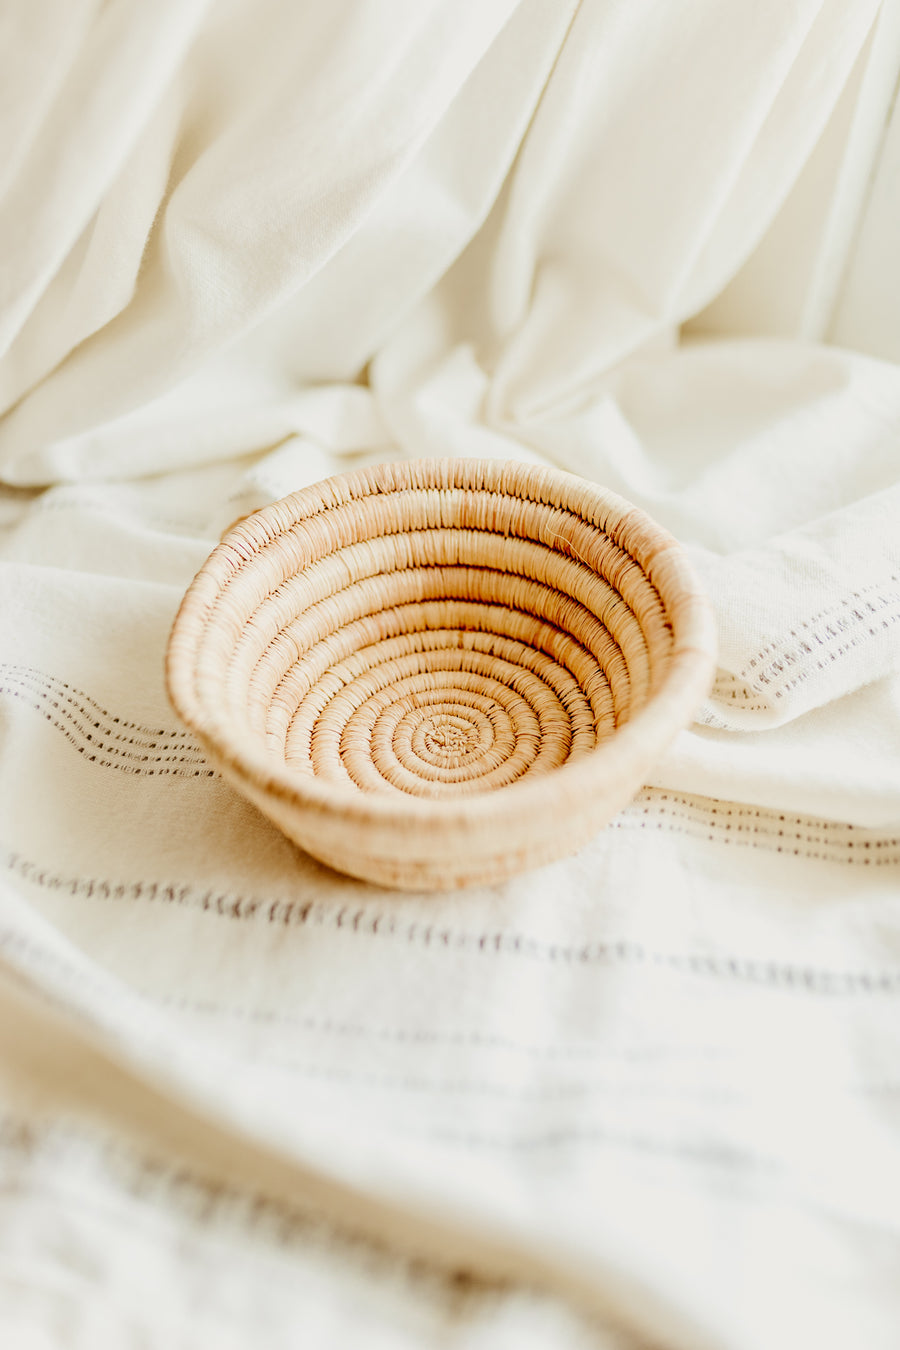 Woven Baskets | Small